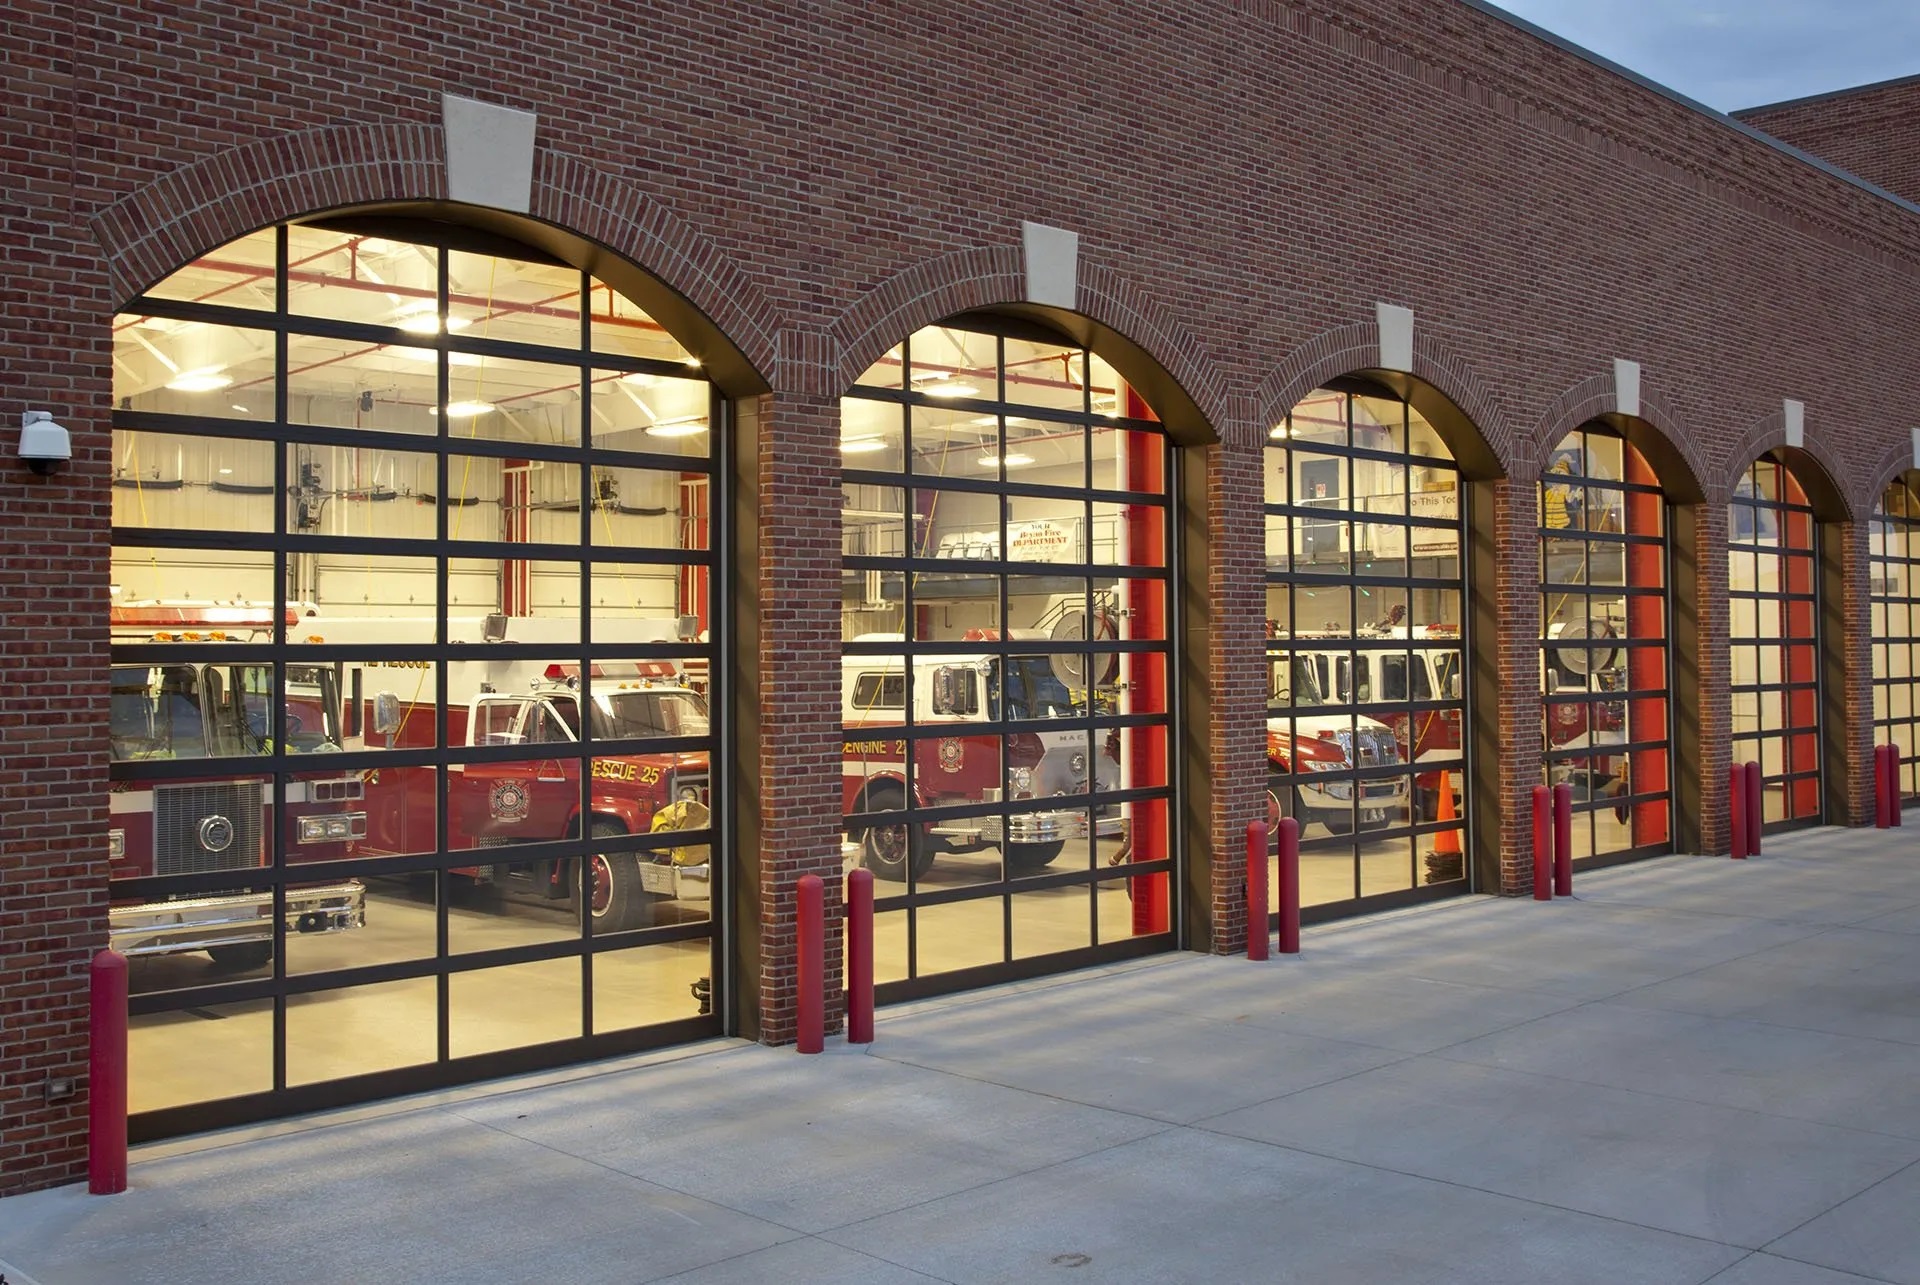 Picture of a red brick fire station with see through garage doors.